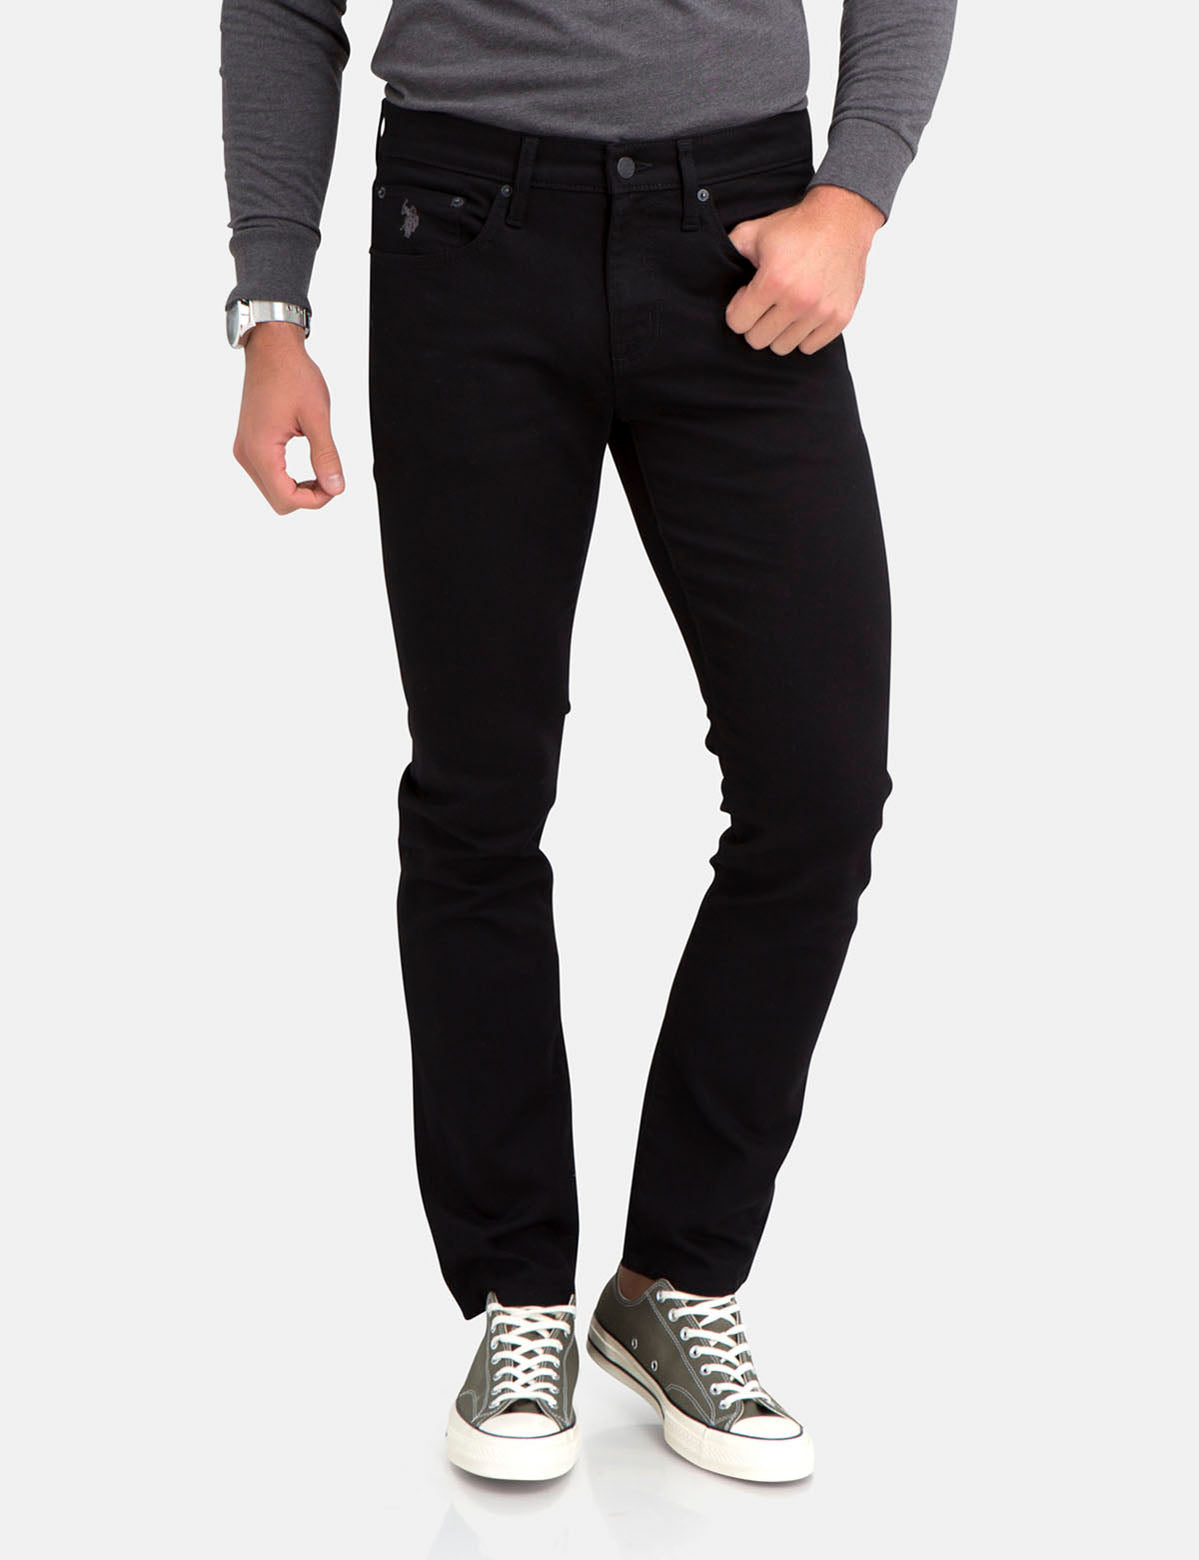 Buy U.S. Polo Assn. Denim Co. Slim Tapered Cotton Spandex Trousers